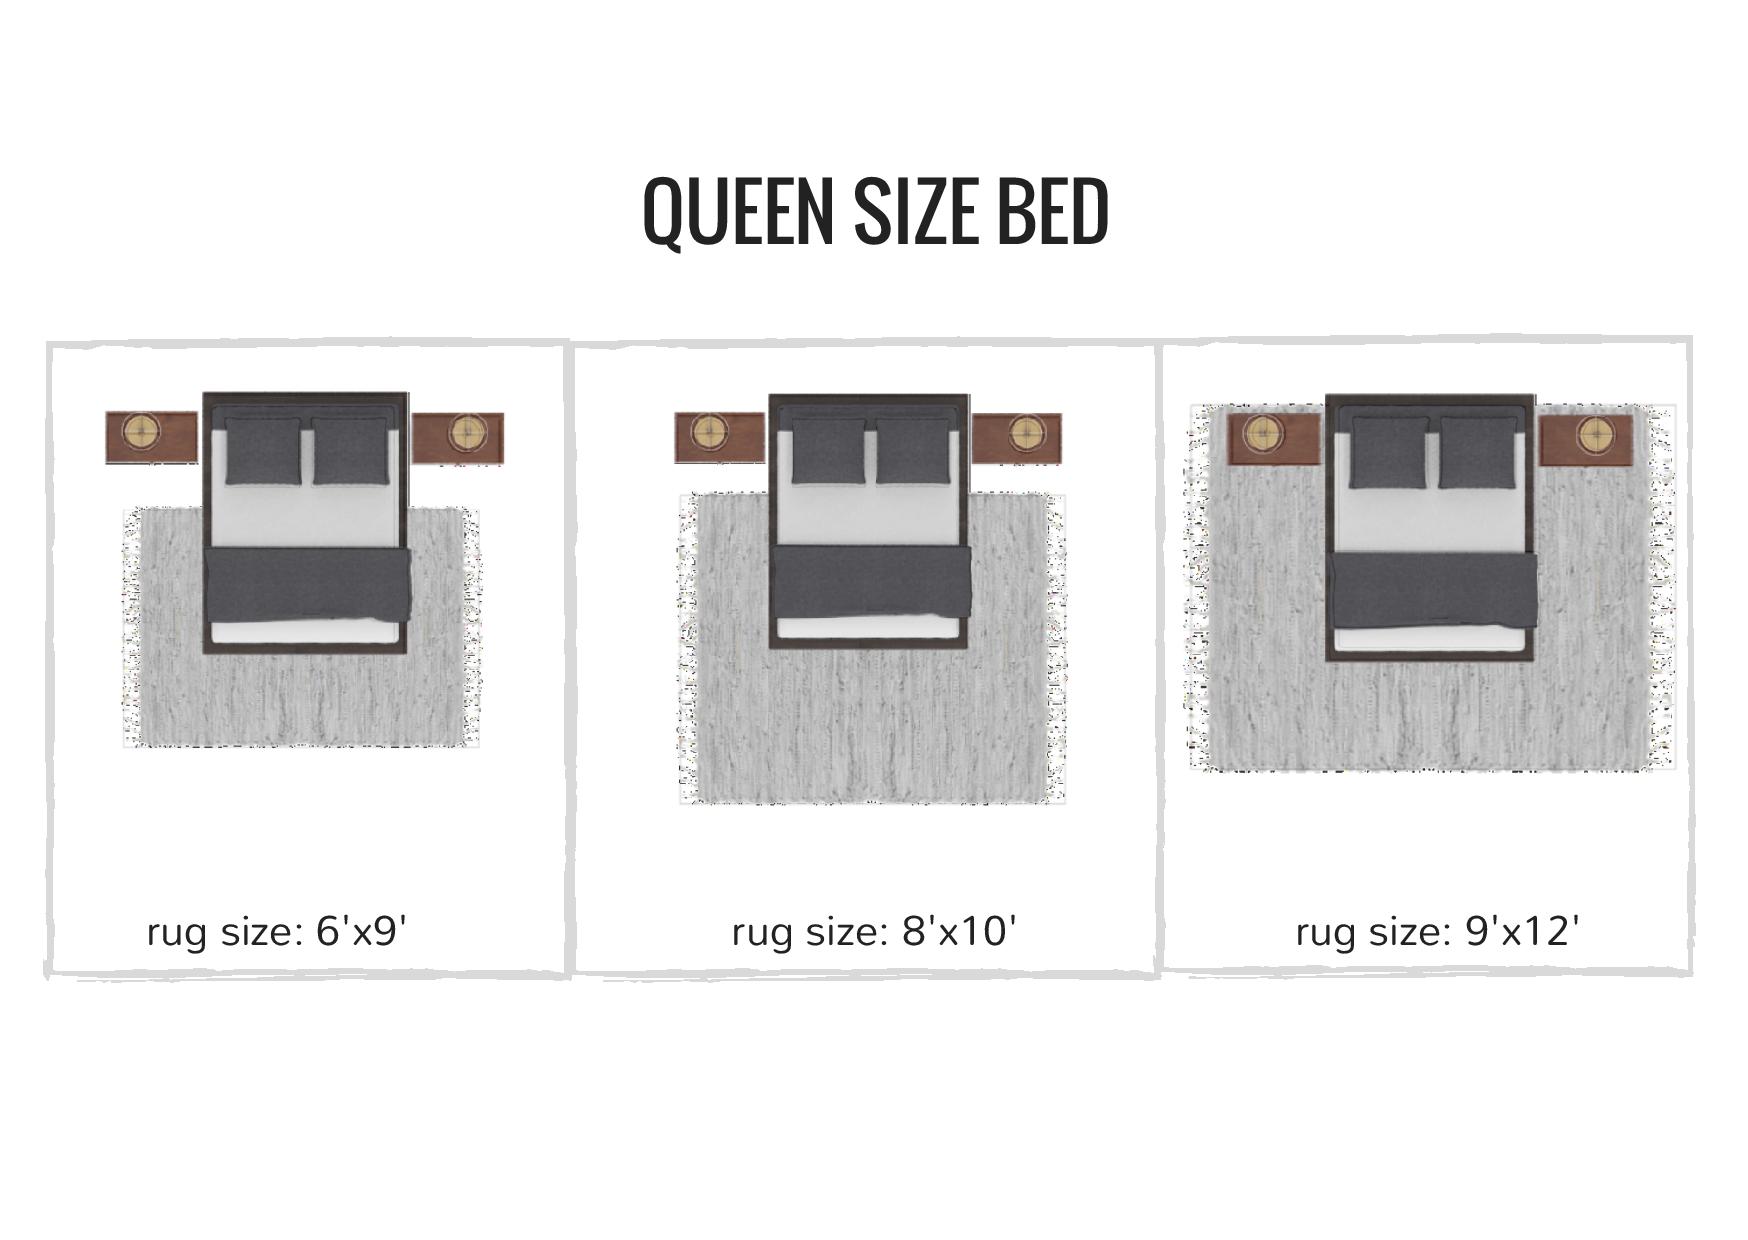 Size Rug Should You Put Under A Queen Bed, What Size Rug Should You Use Under A Queen Bed